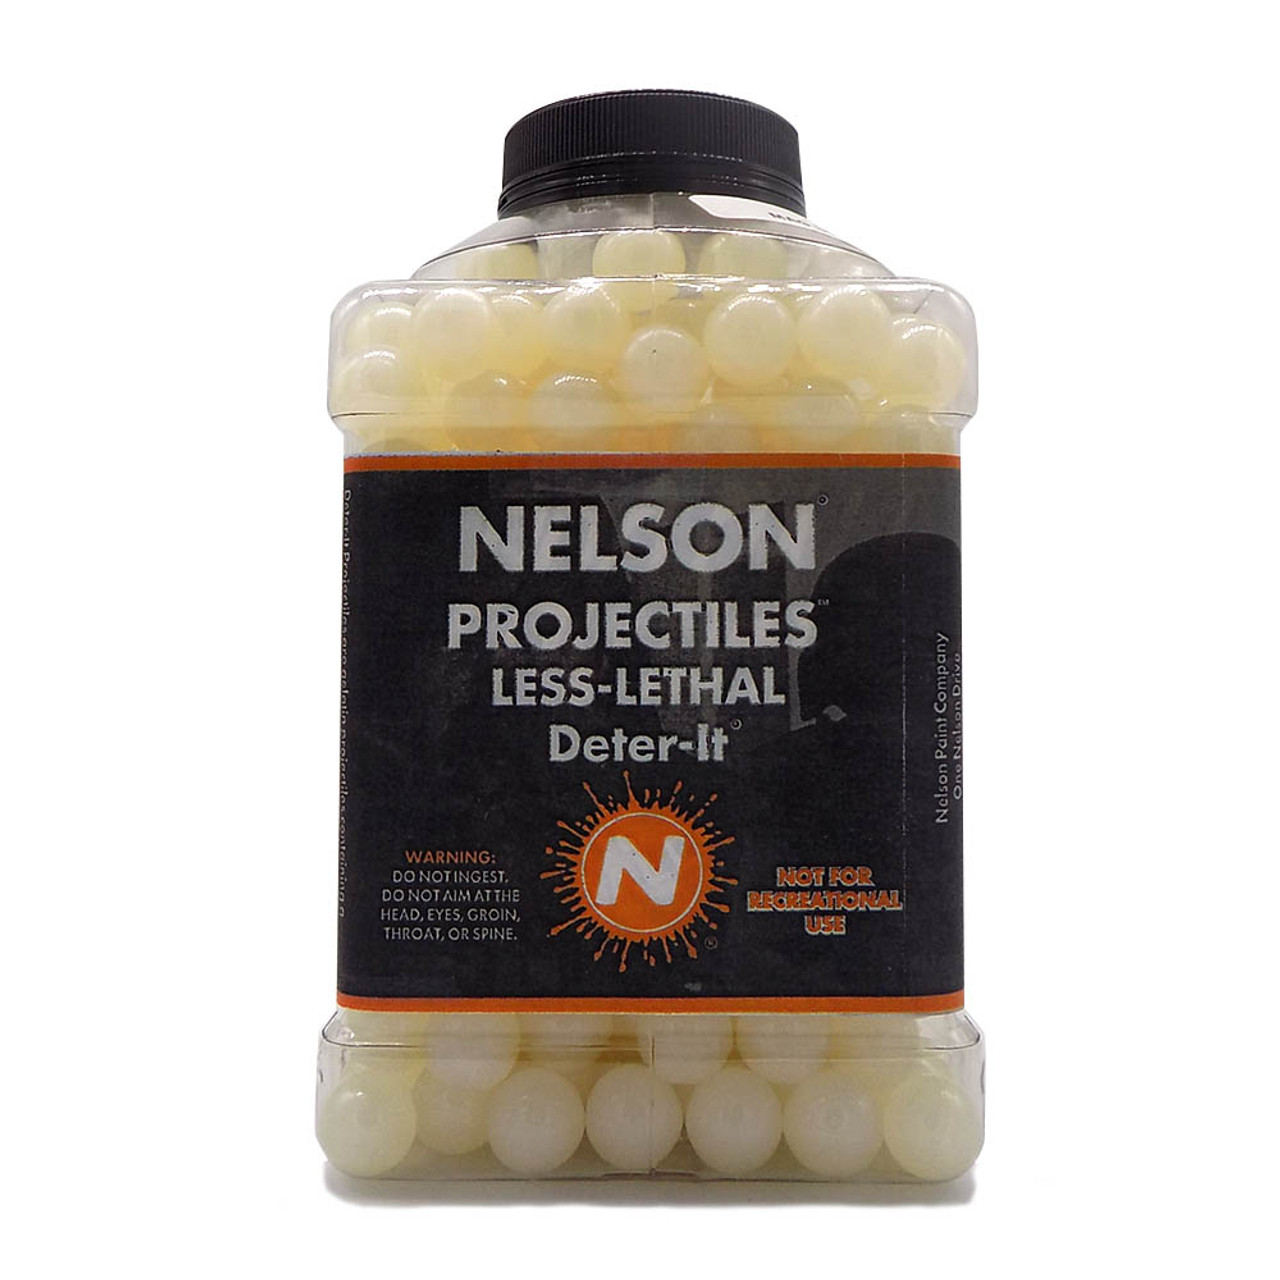 Nelson Deter-It Less Lethal Animal Control Projectiles 400 Count